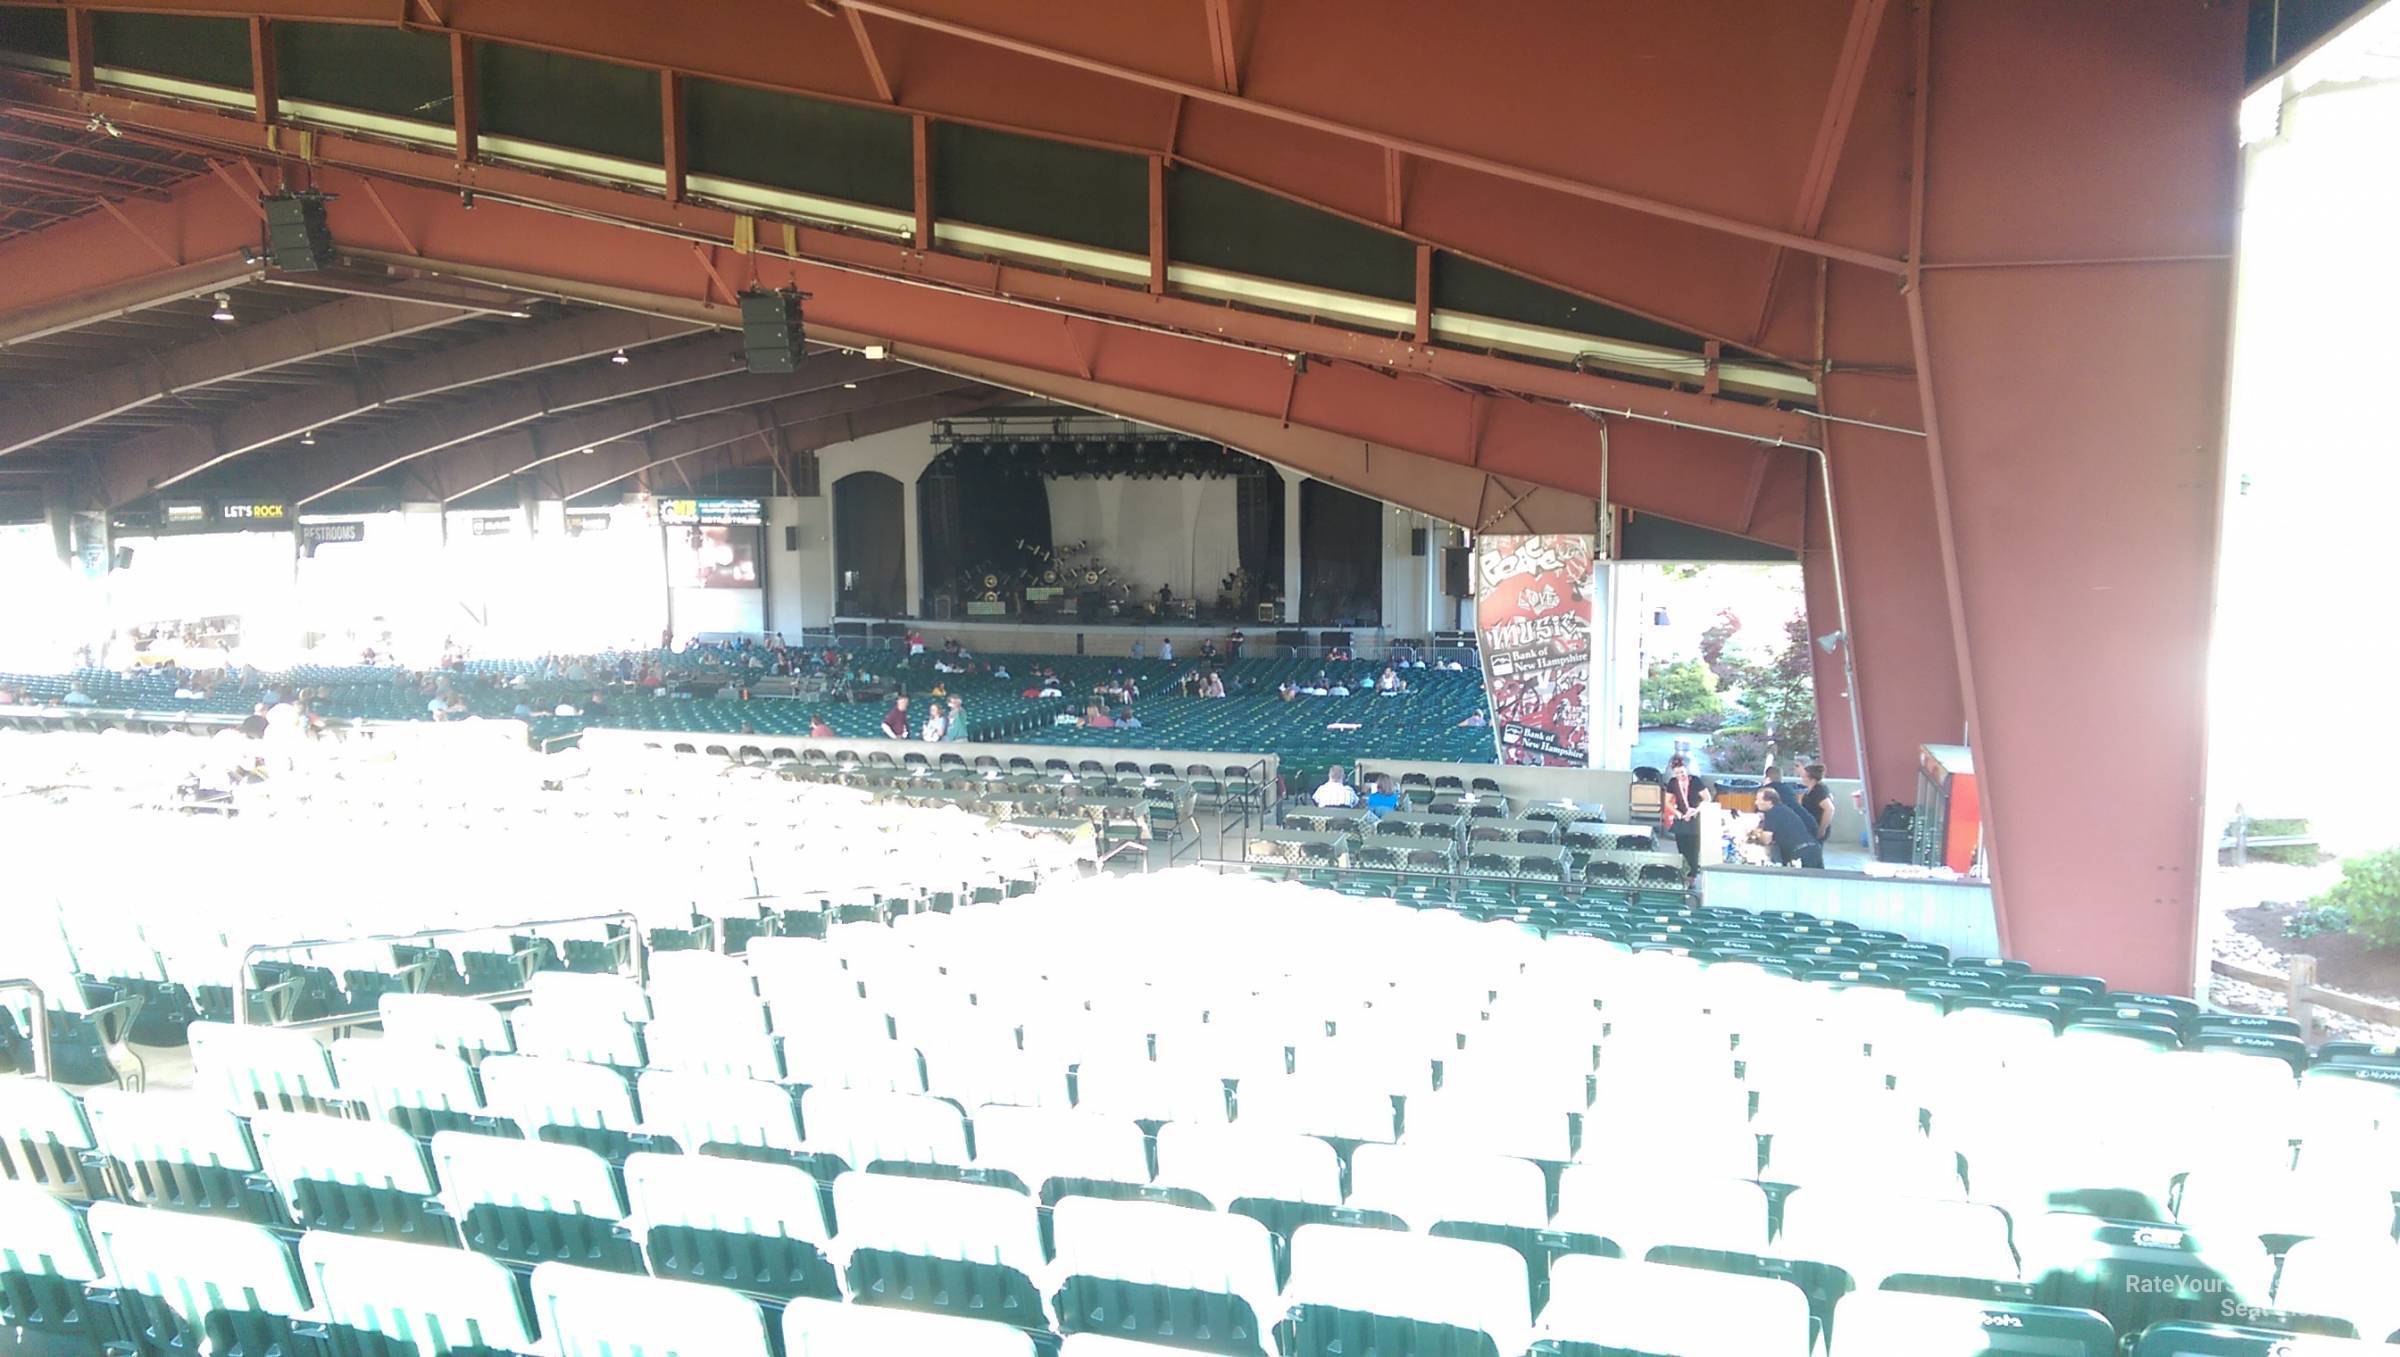 section 3e, row 20 seat view  - bank of new hampshire pavilion